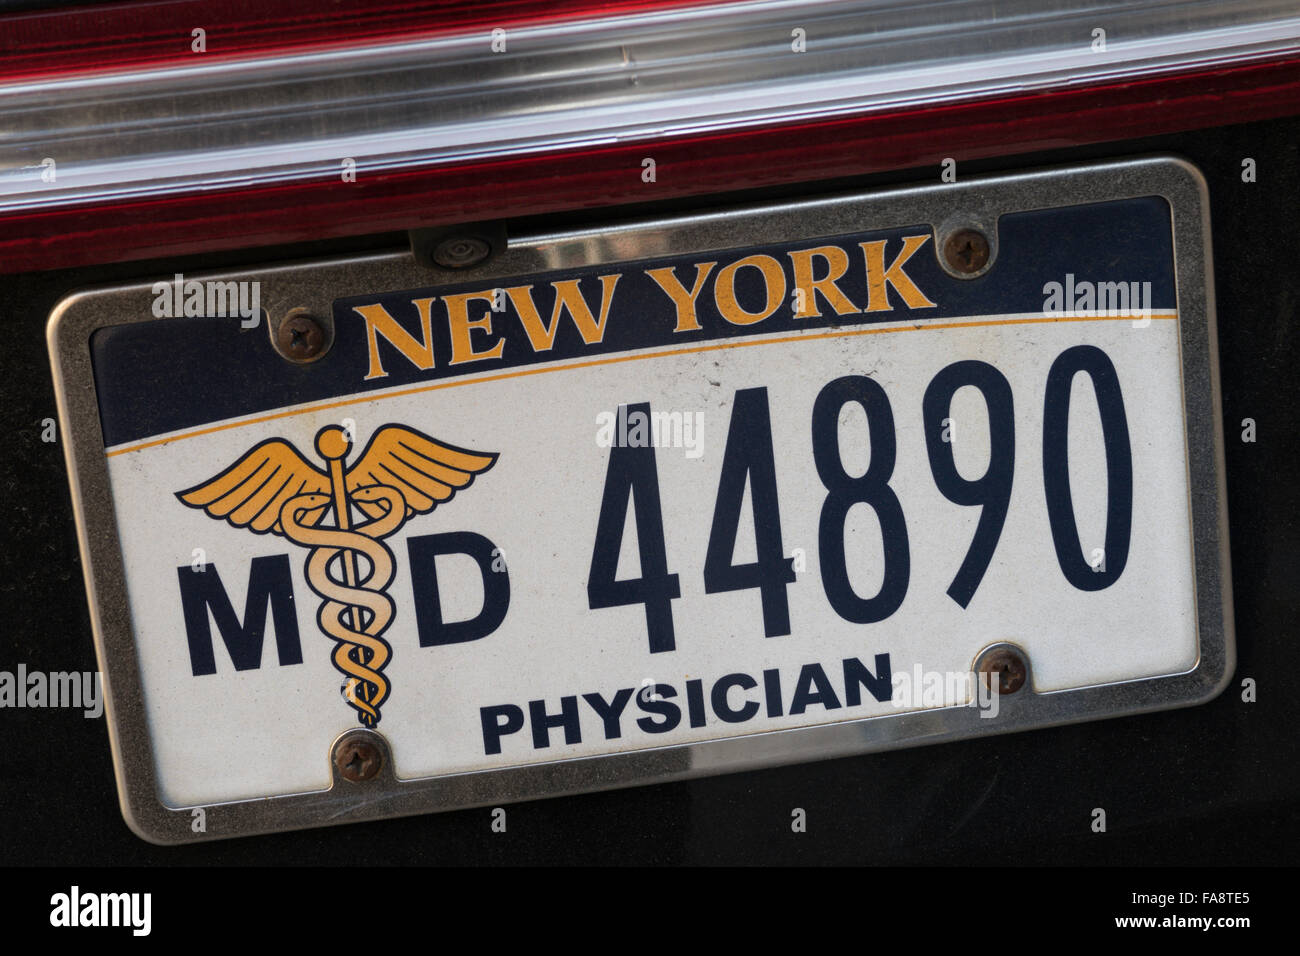 New York Physician License Plate, NYC Stock Photo